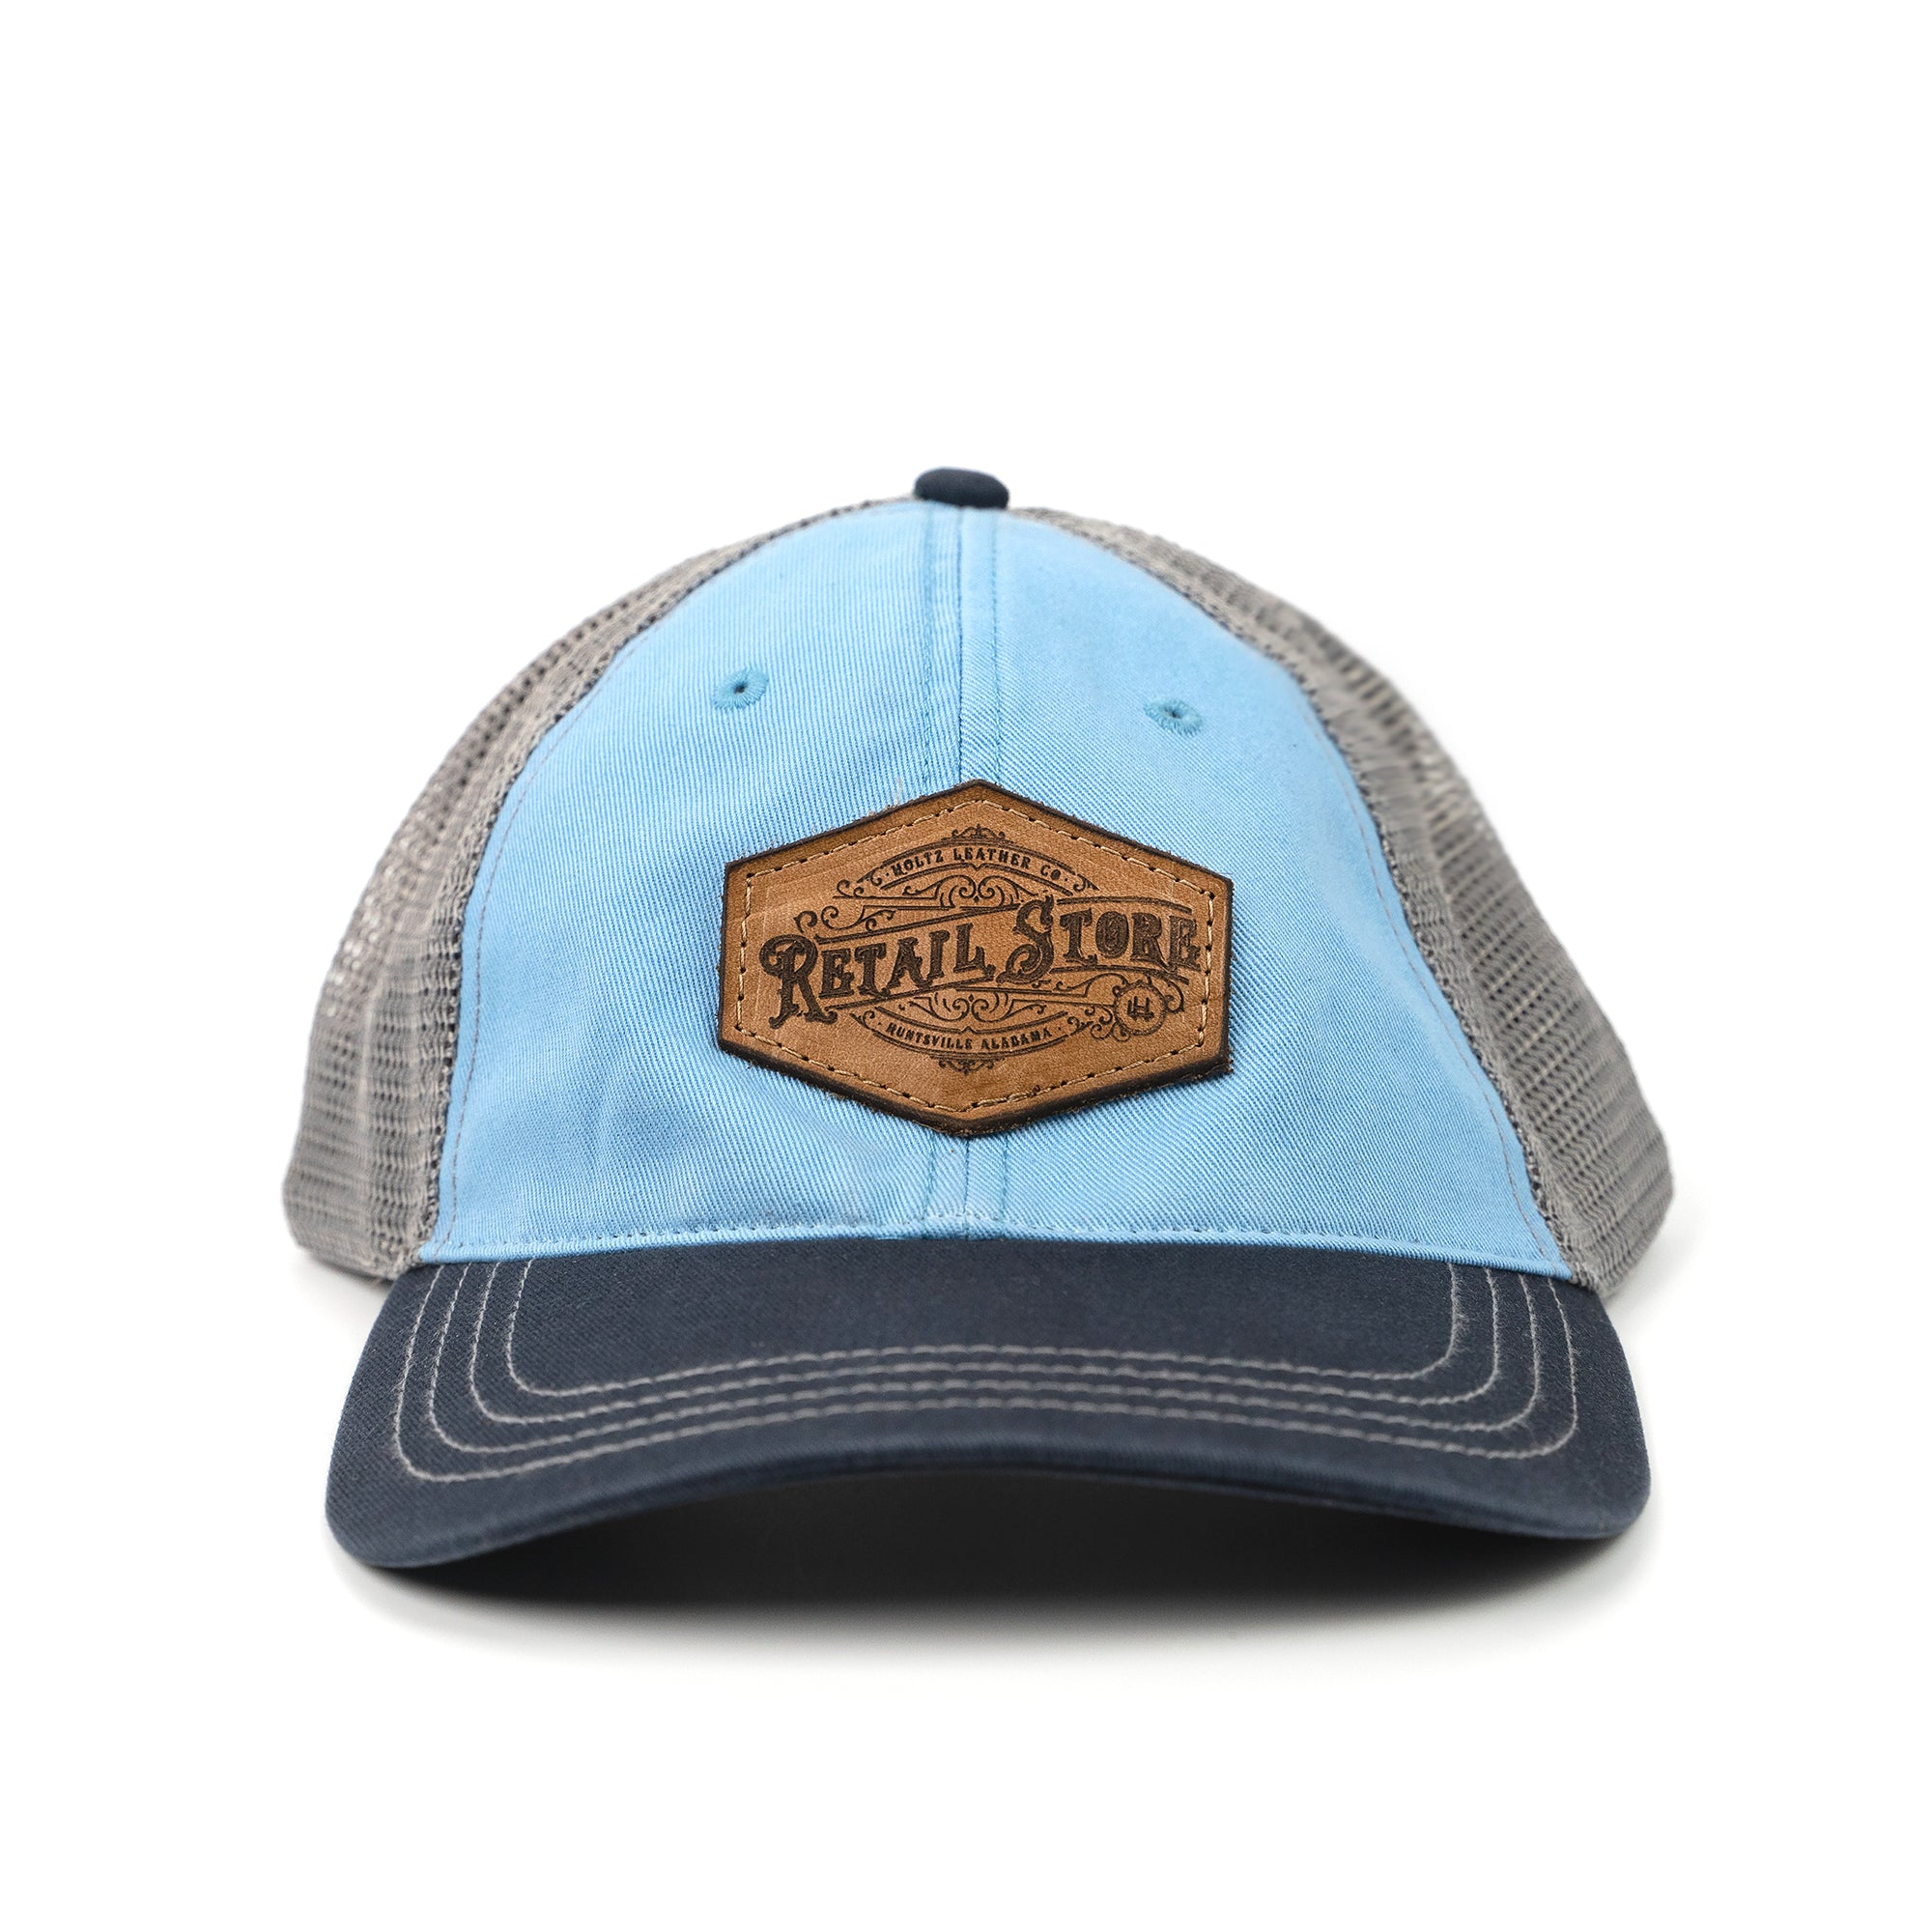 Blue and navy relaxed trucker hat with customized leather patch